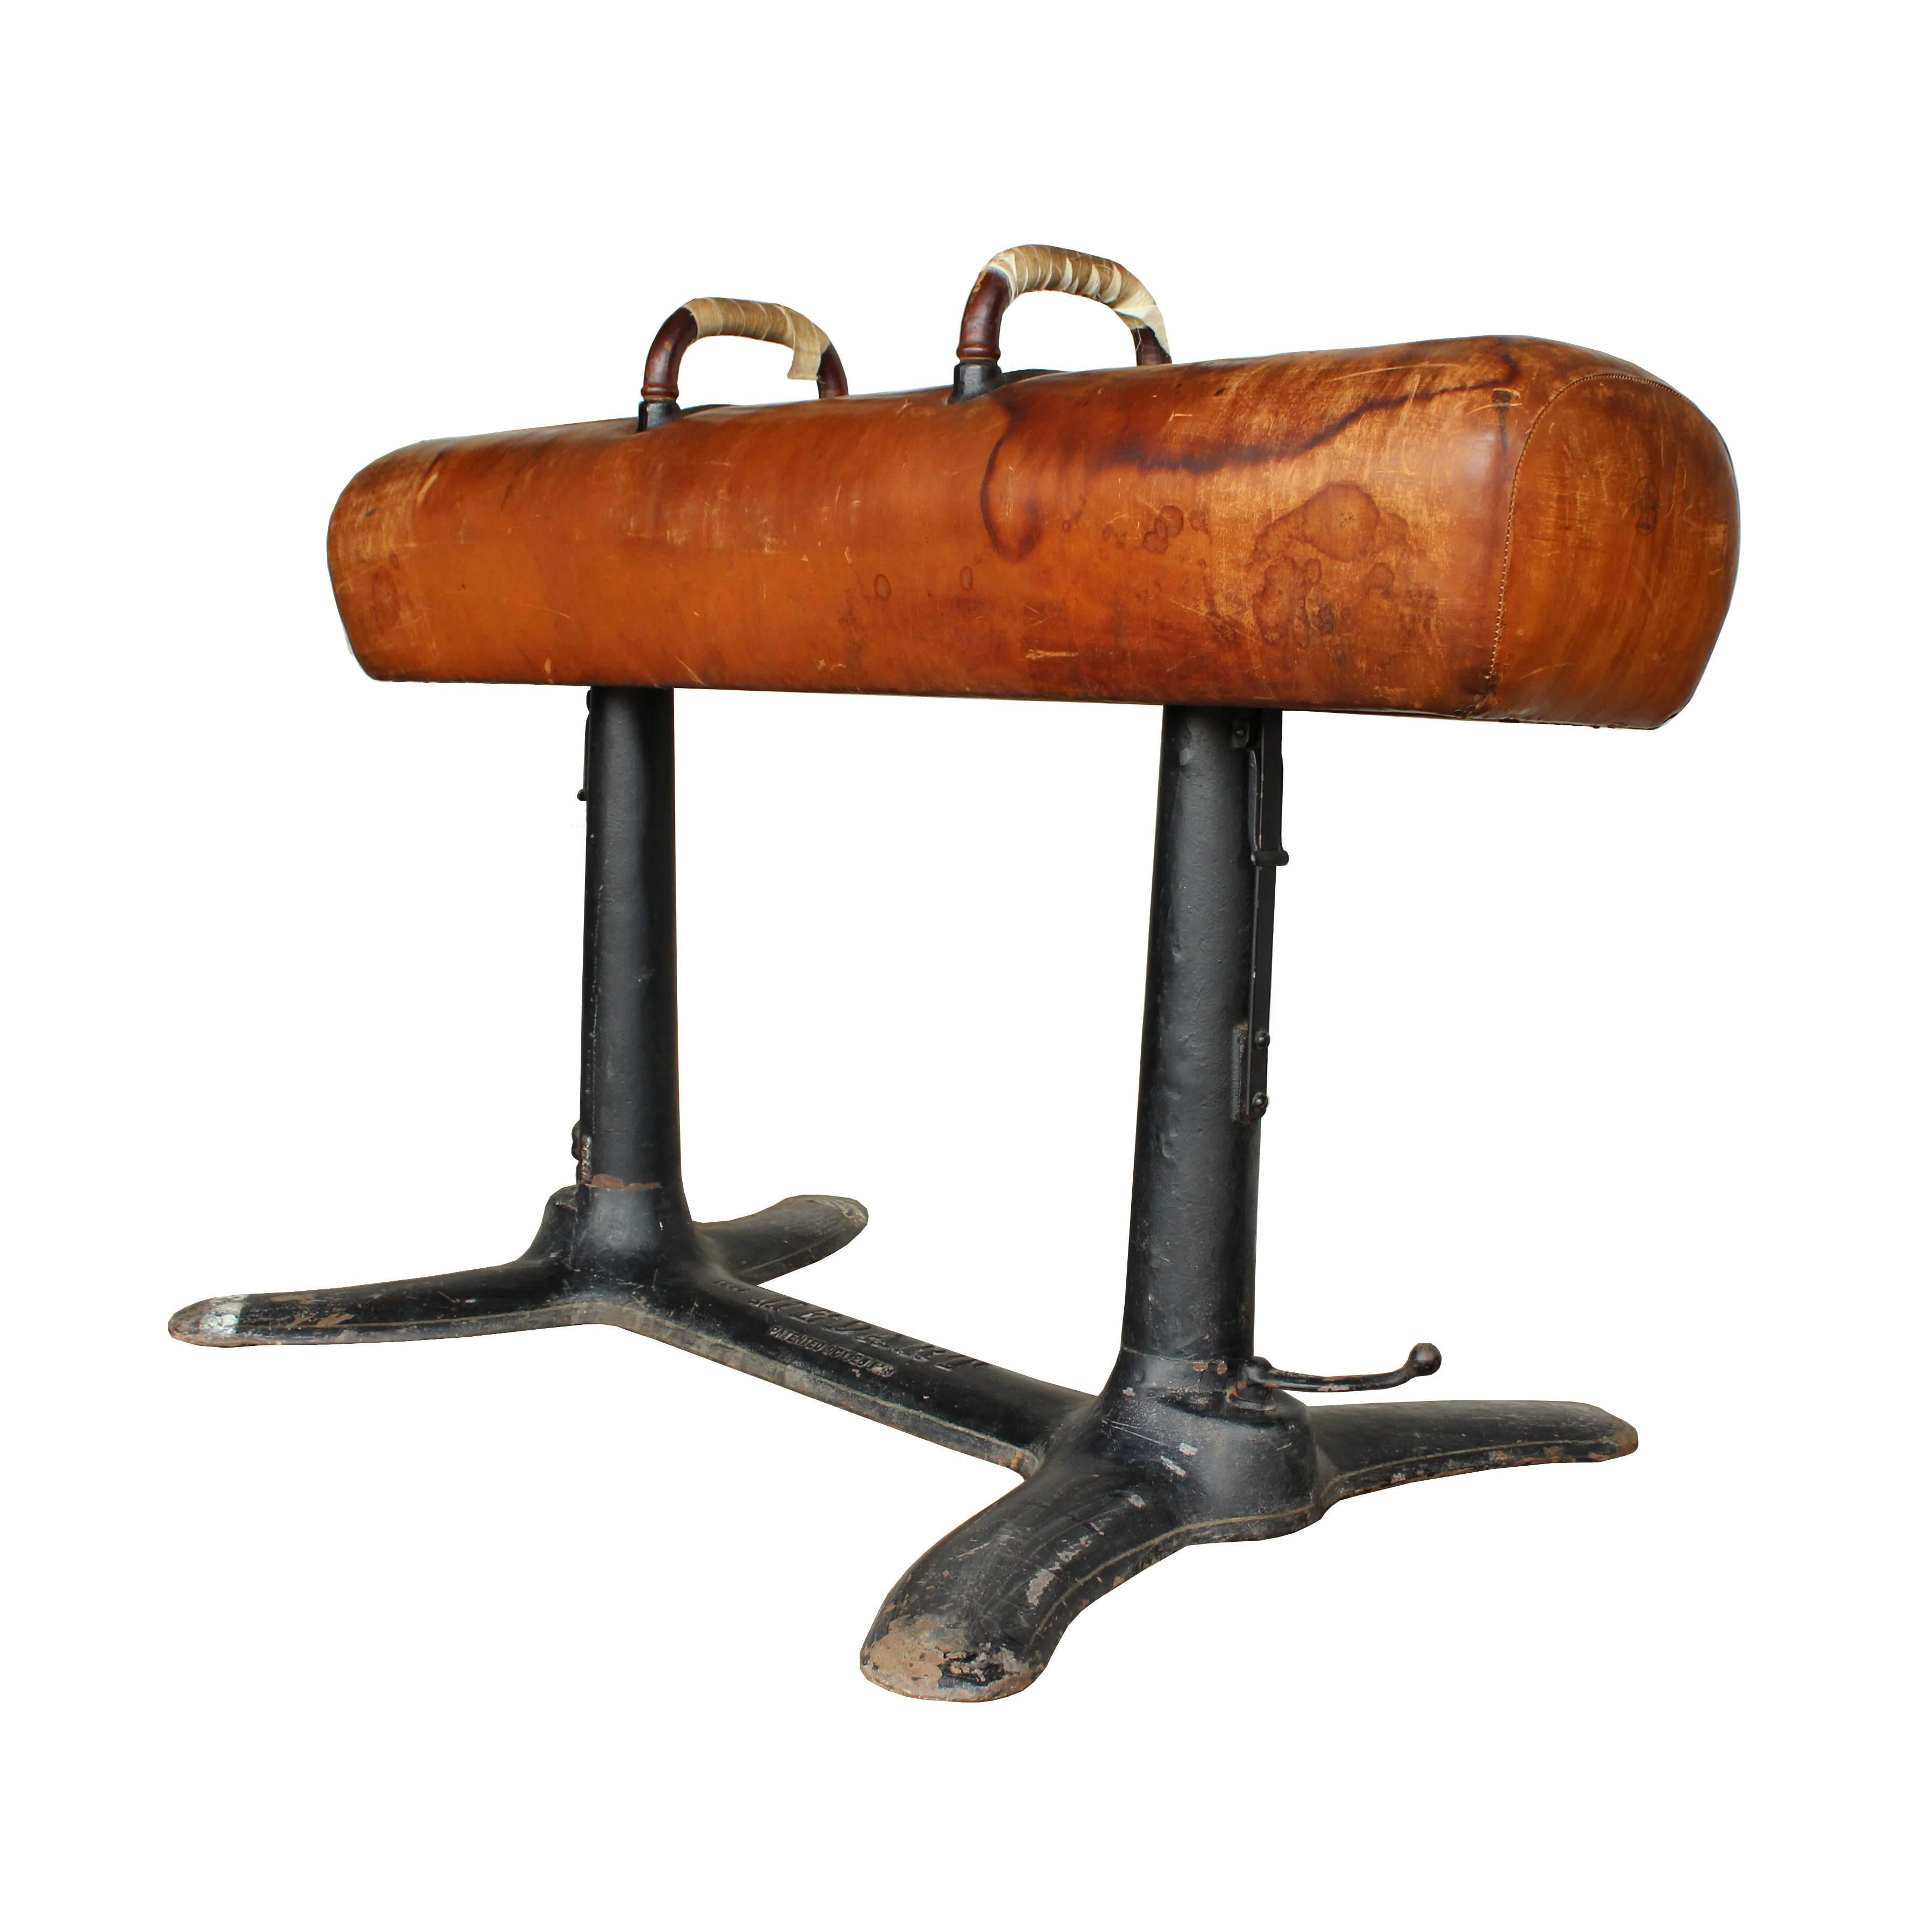 Patented in 1913 with a unique retracting caster system, this Medart adjustable height pommel horse is a one of a kind piece. With leather handles, heavy cast iron base, and a well-aged leather body, this pommel horse would make a statement anywhere.